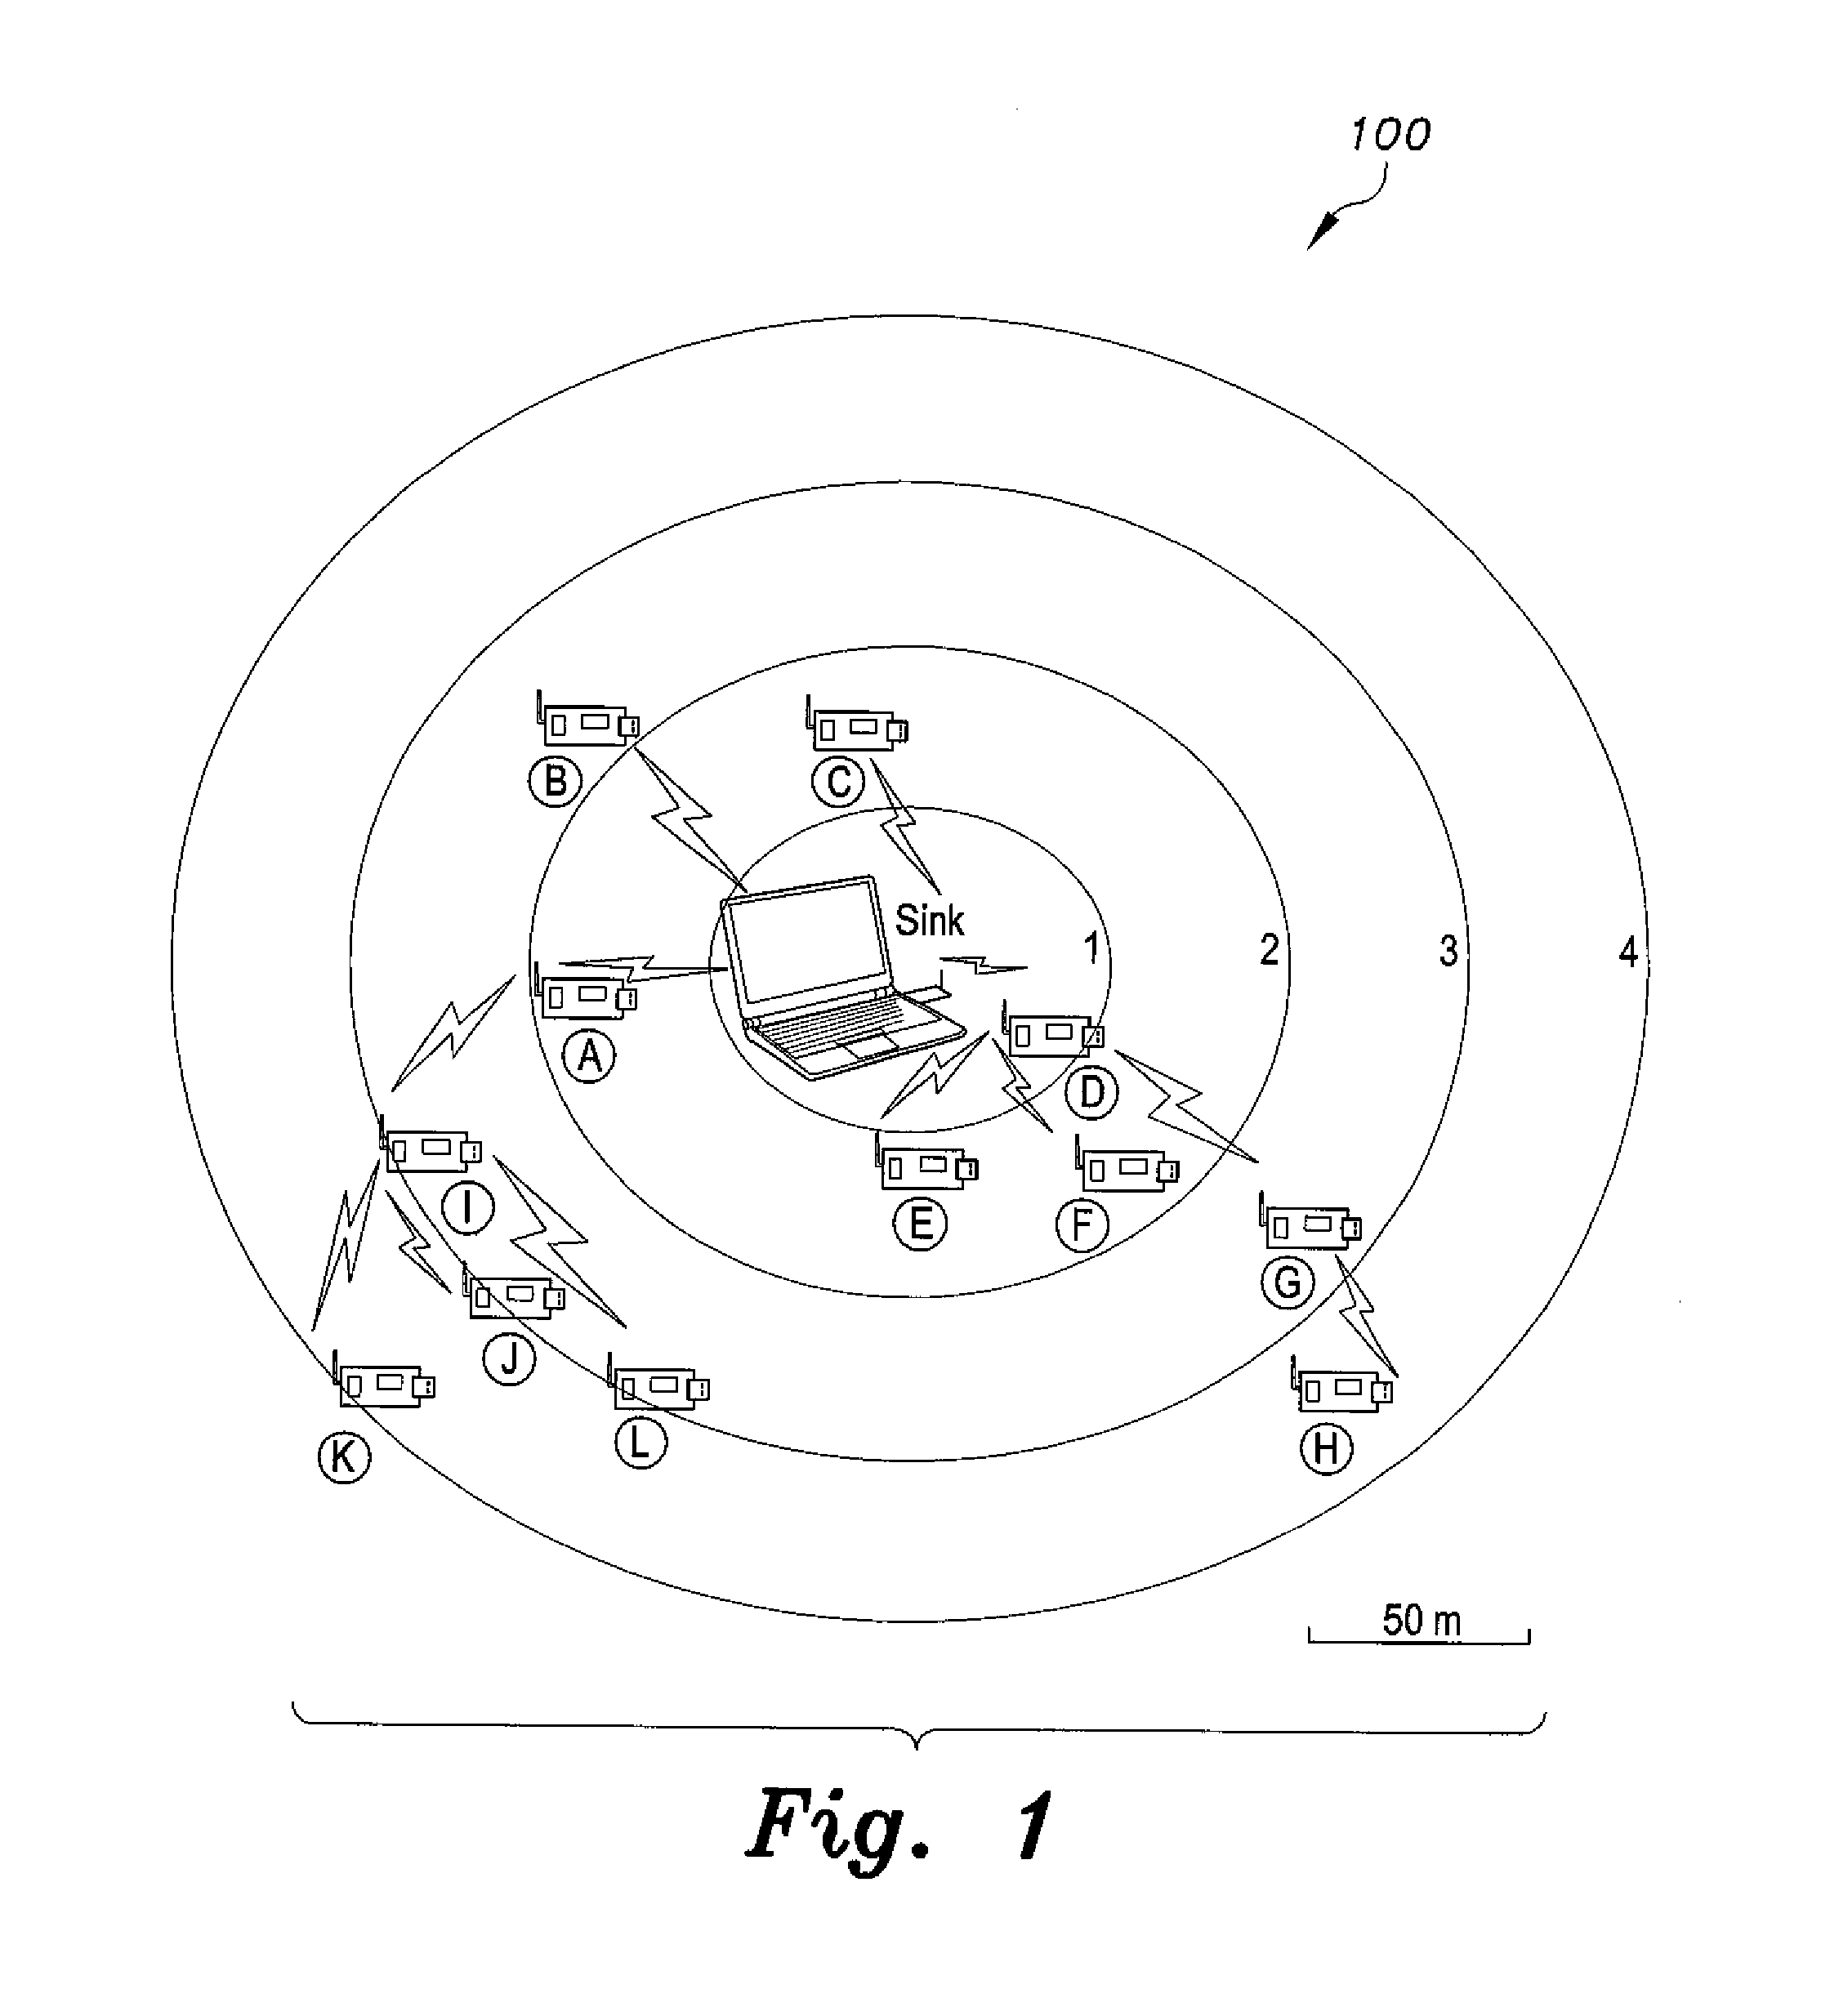 Coverage, connectivity and communication (C3) protocol method for wireless sensor networks